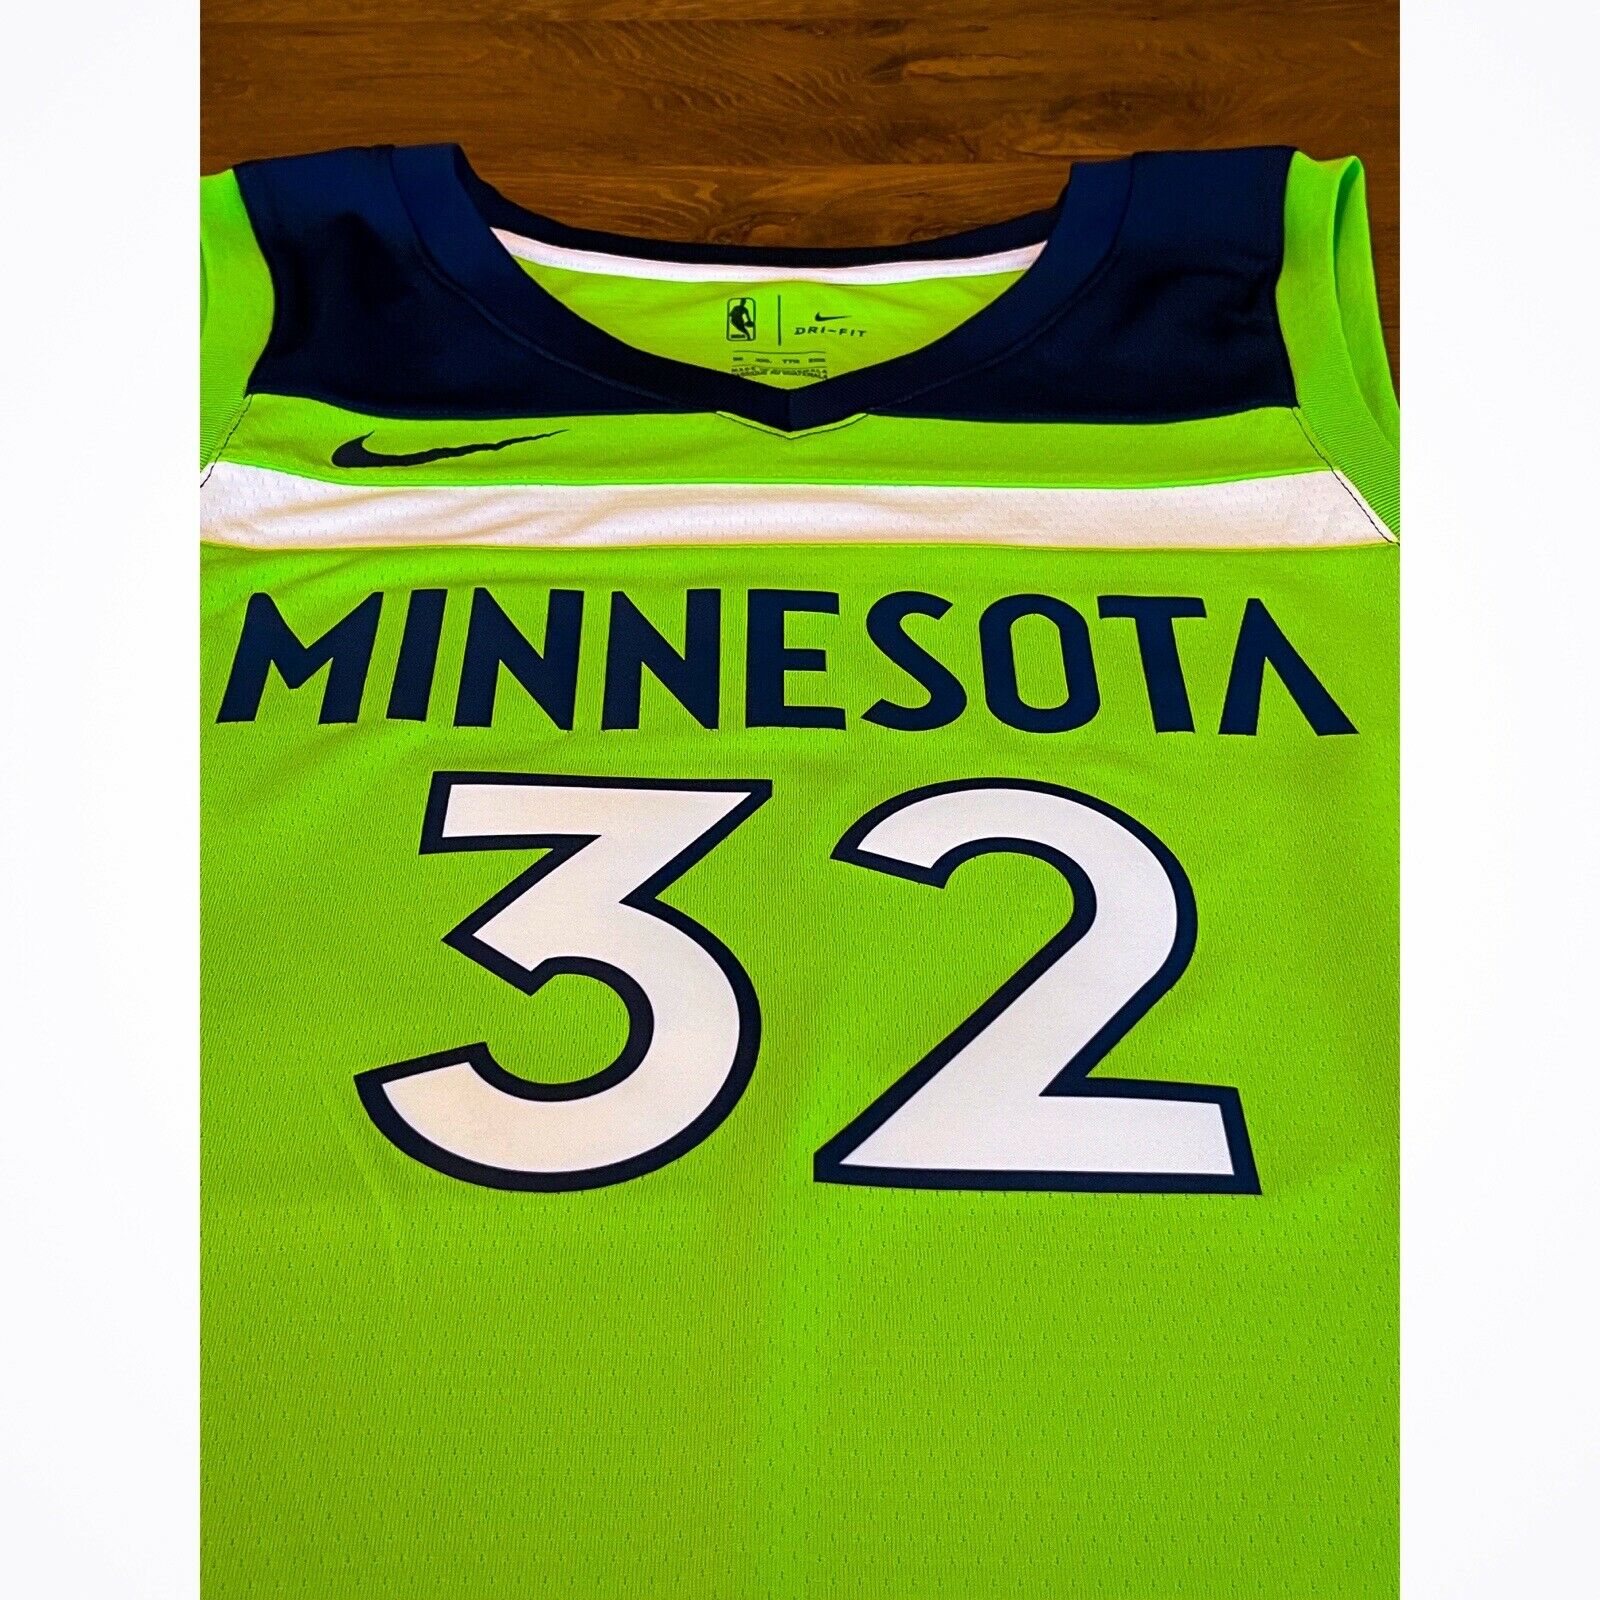 Karl Anthony Towns Signed Minnesota Timberwolves (2018 City) Jersey JSA -  Autographed NBA Jerseys at 's Sports Collectibles Store